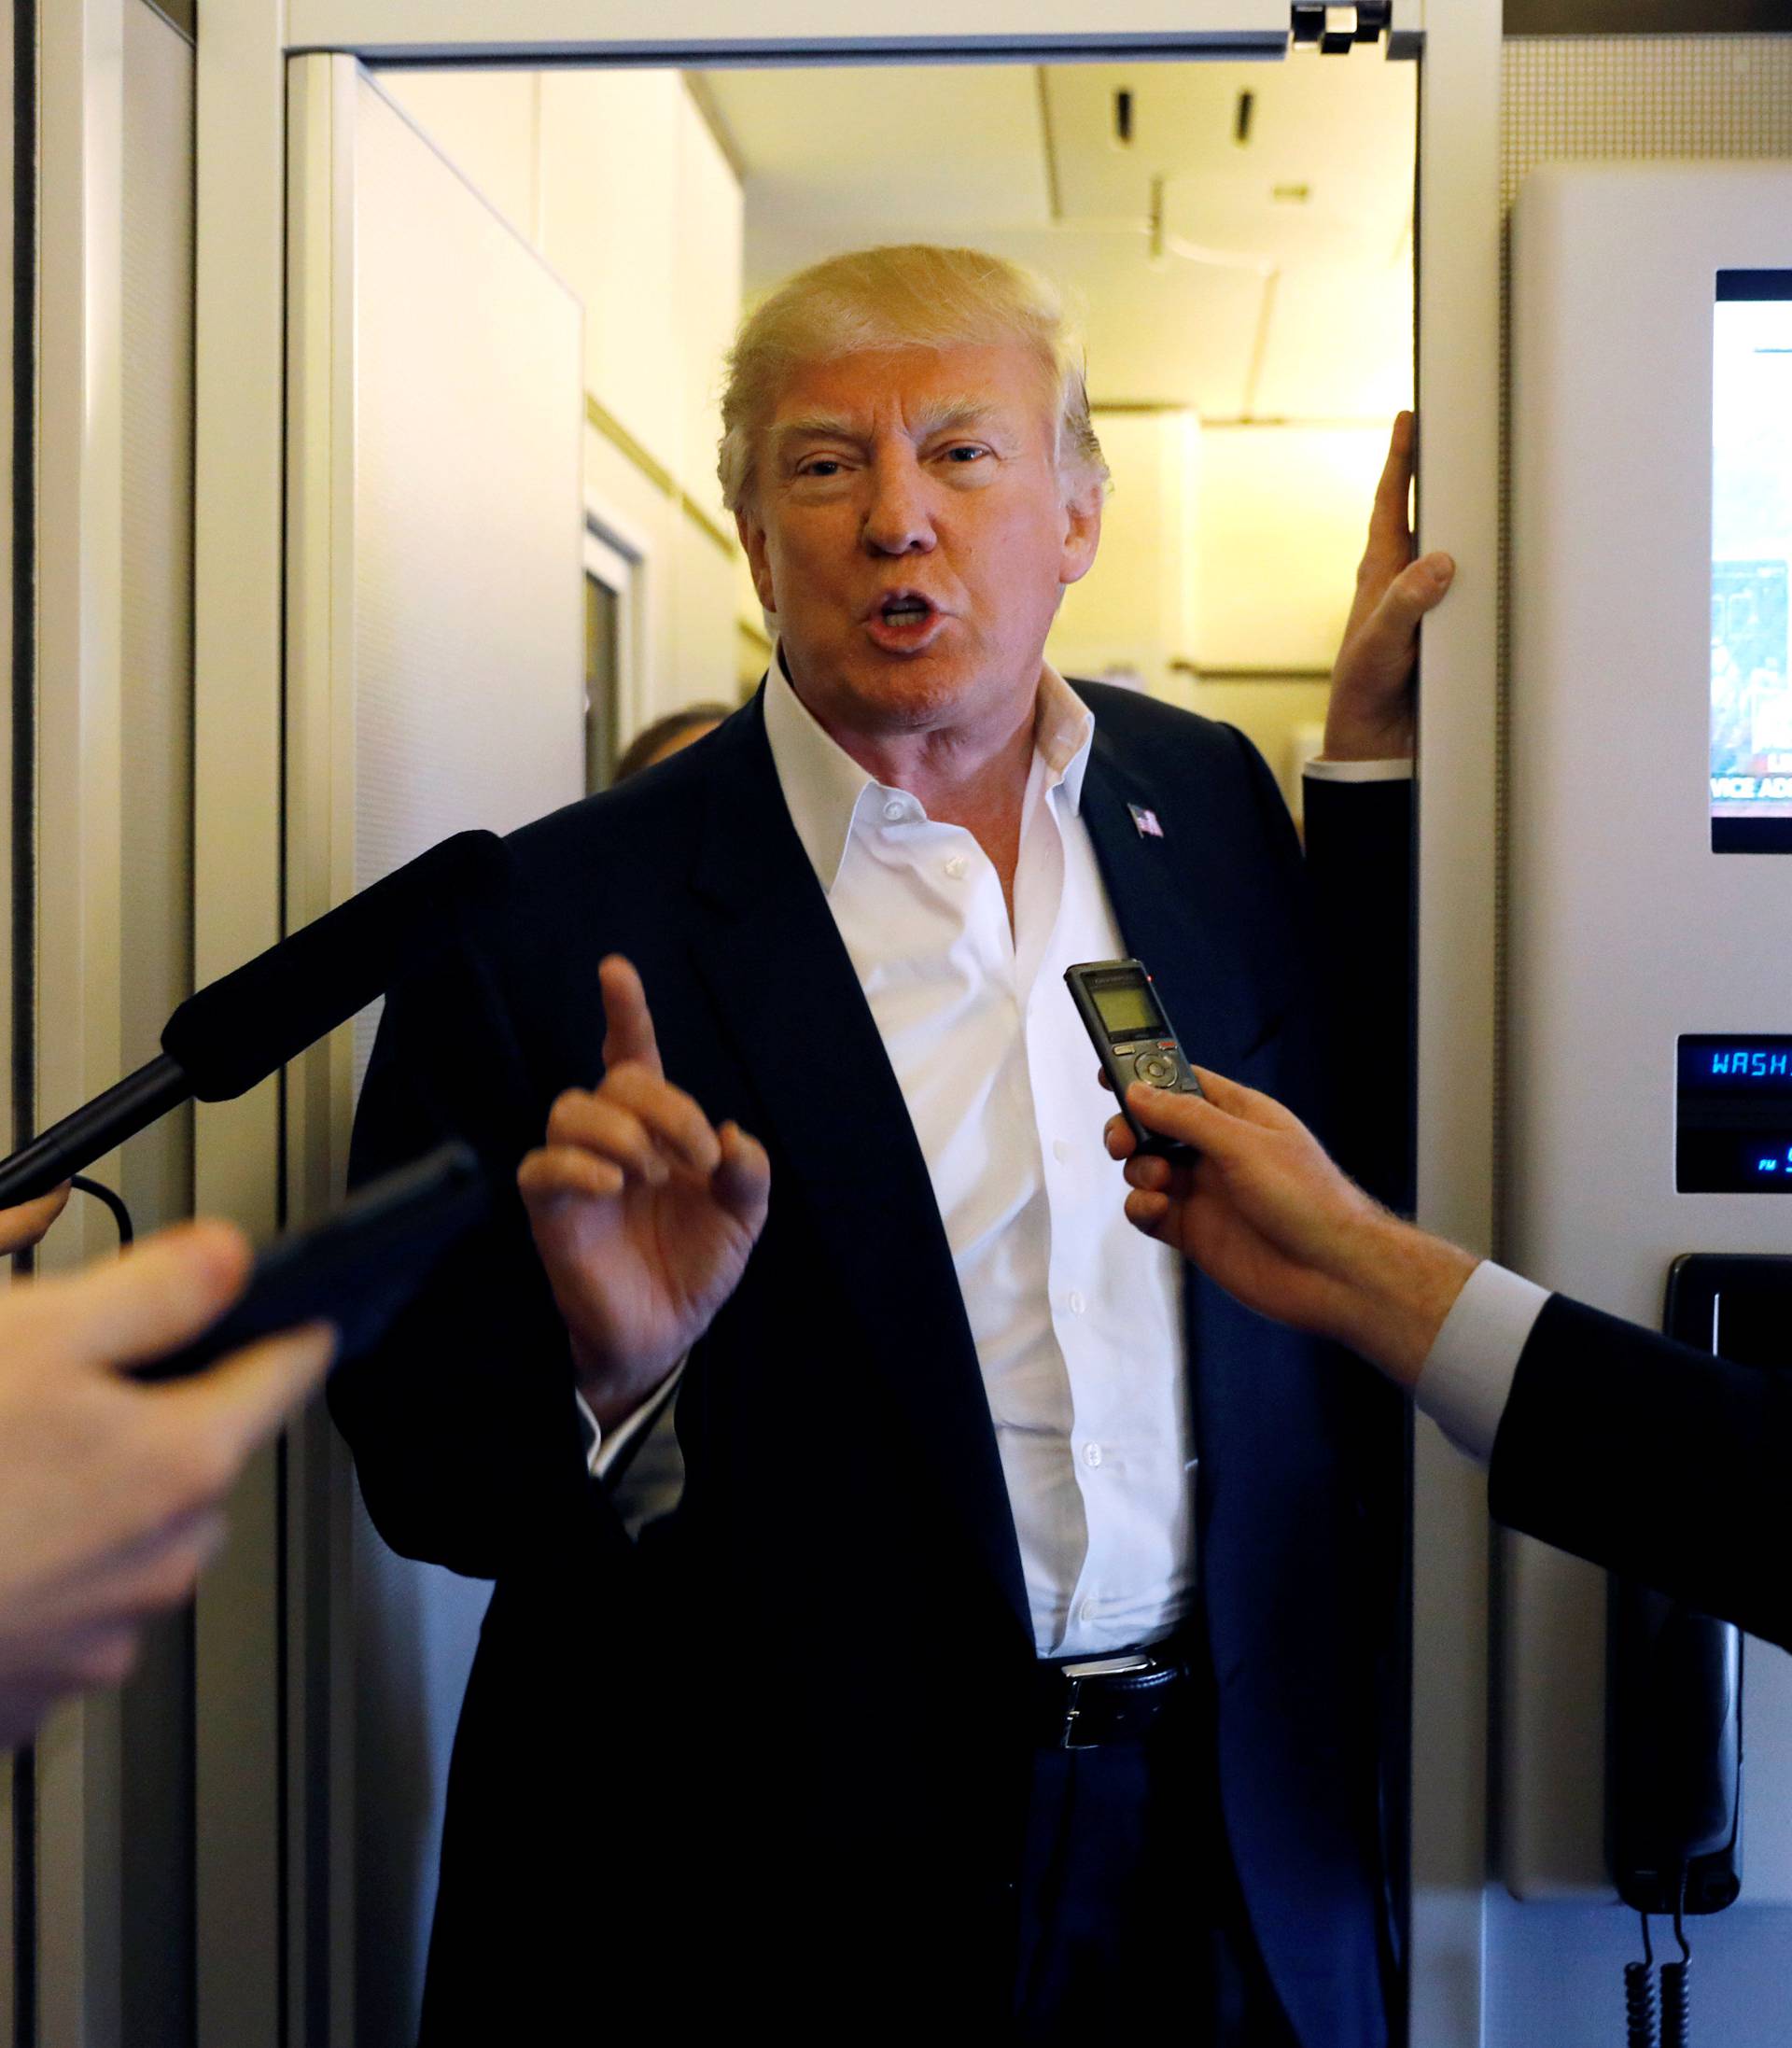 U.S. President Donald Trump speaks with reporters aboard Air Force One on his way to a "Make America Great Again" rally at Orlando Melbourne International Airport in Melbourne, Florida